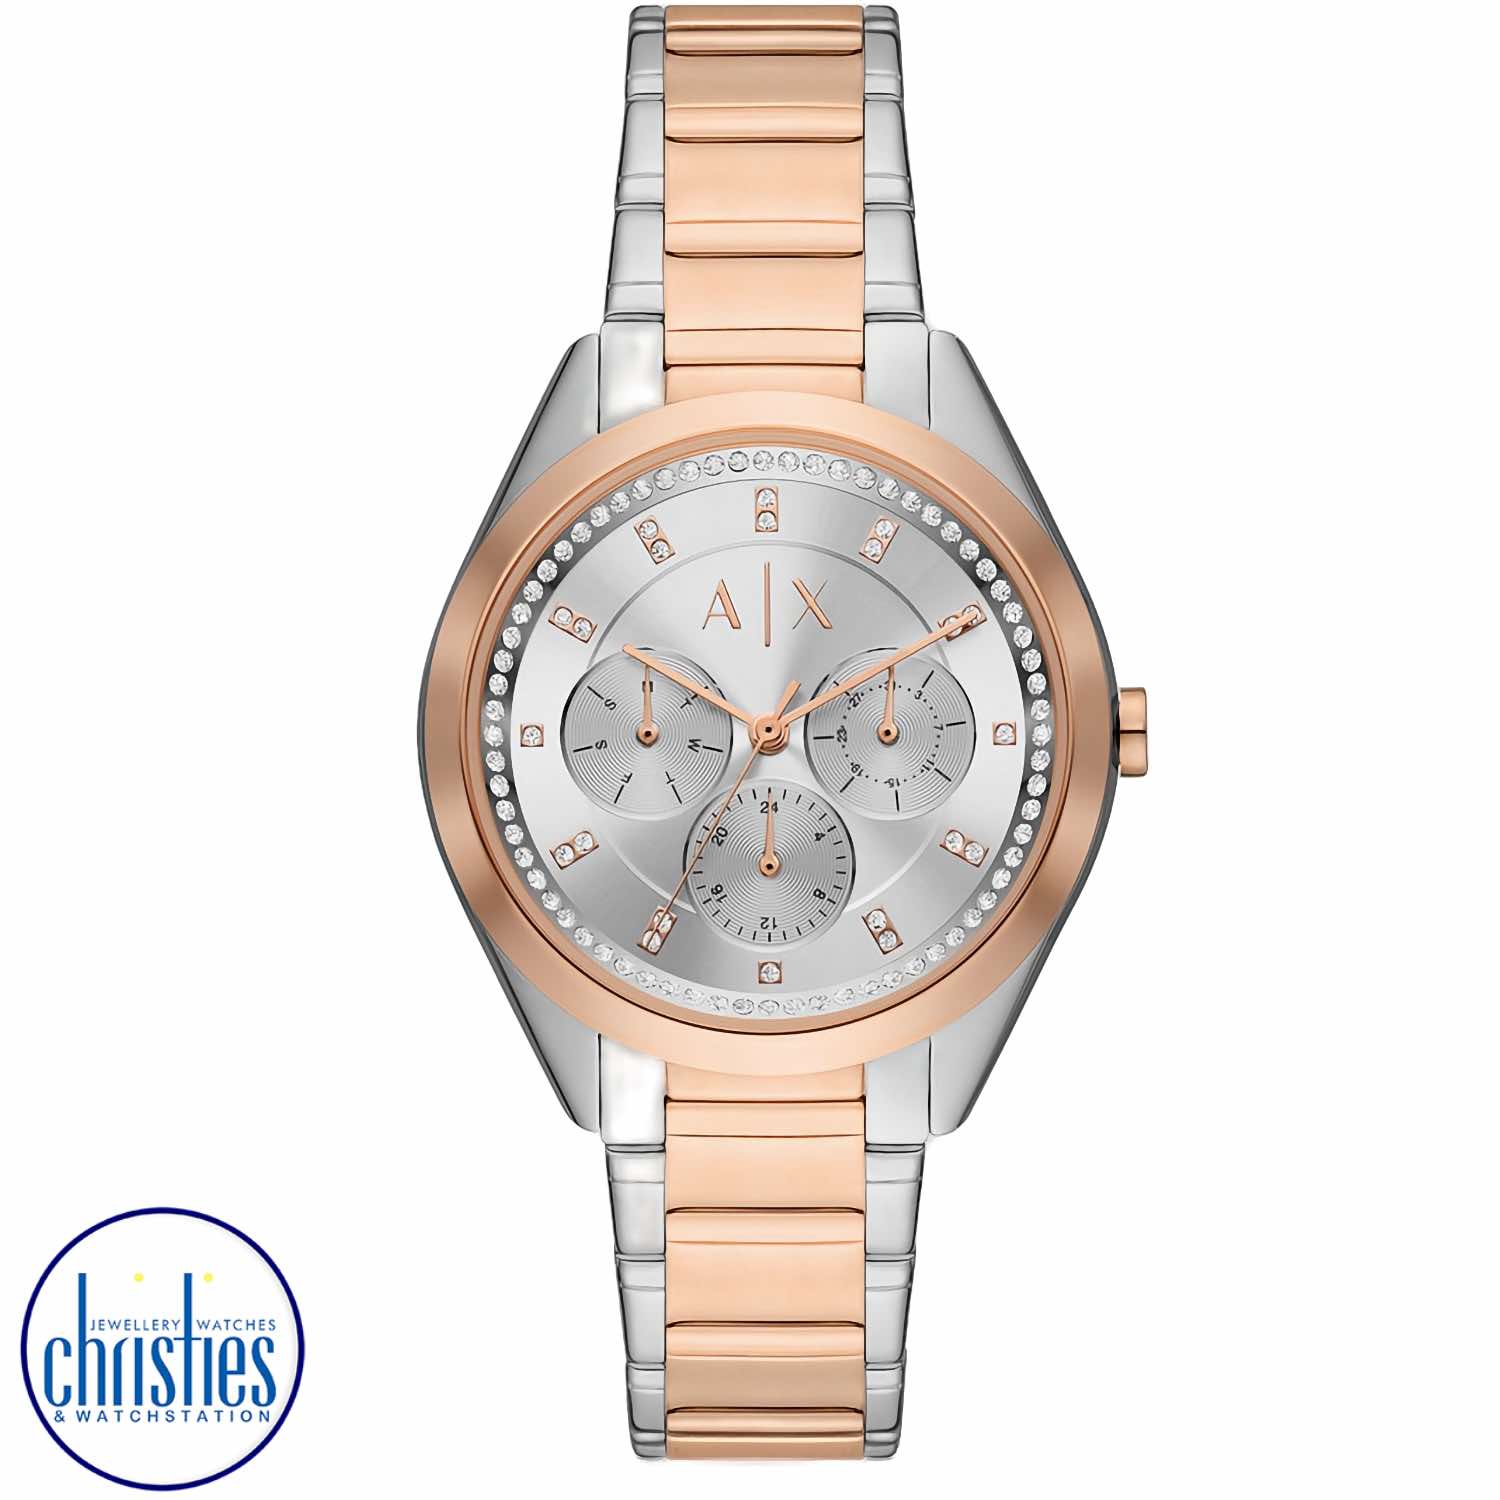 AX5655 A|X Armani Exchange LADY GIACOMO Multifunction Two-Tone Watch. AX5655 A|X Armani Exchange LADY GIACOMO Multifunction Two-Tone WatchAfterpay - Split your purchase into 4 instalments - Pay for your purchase over 4 instalments, due every two weeks.